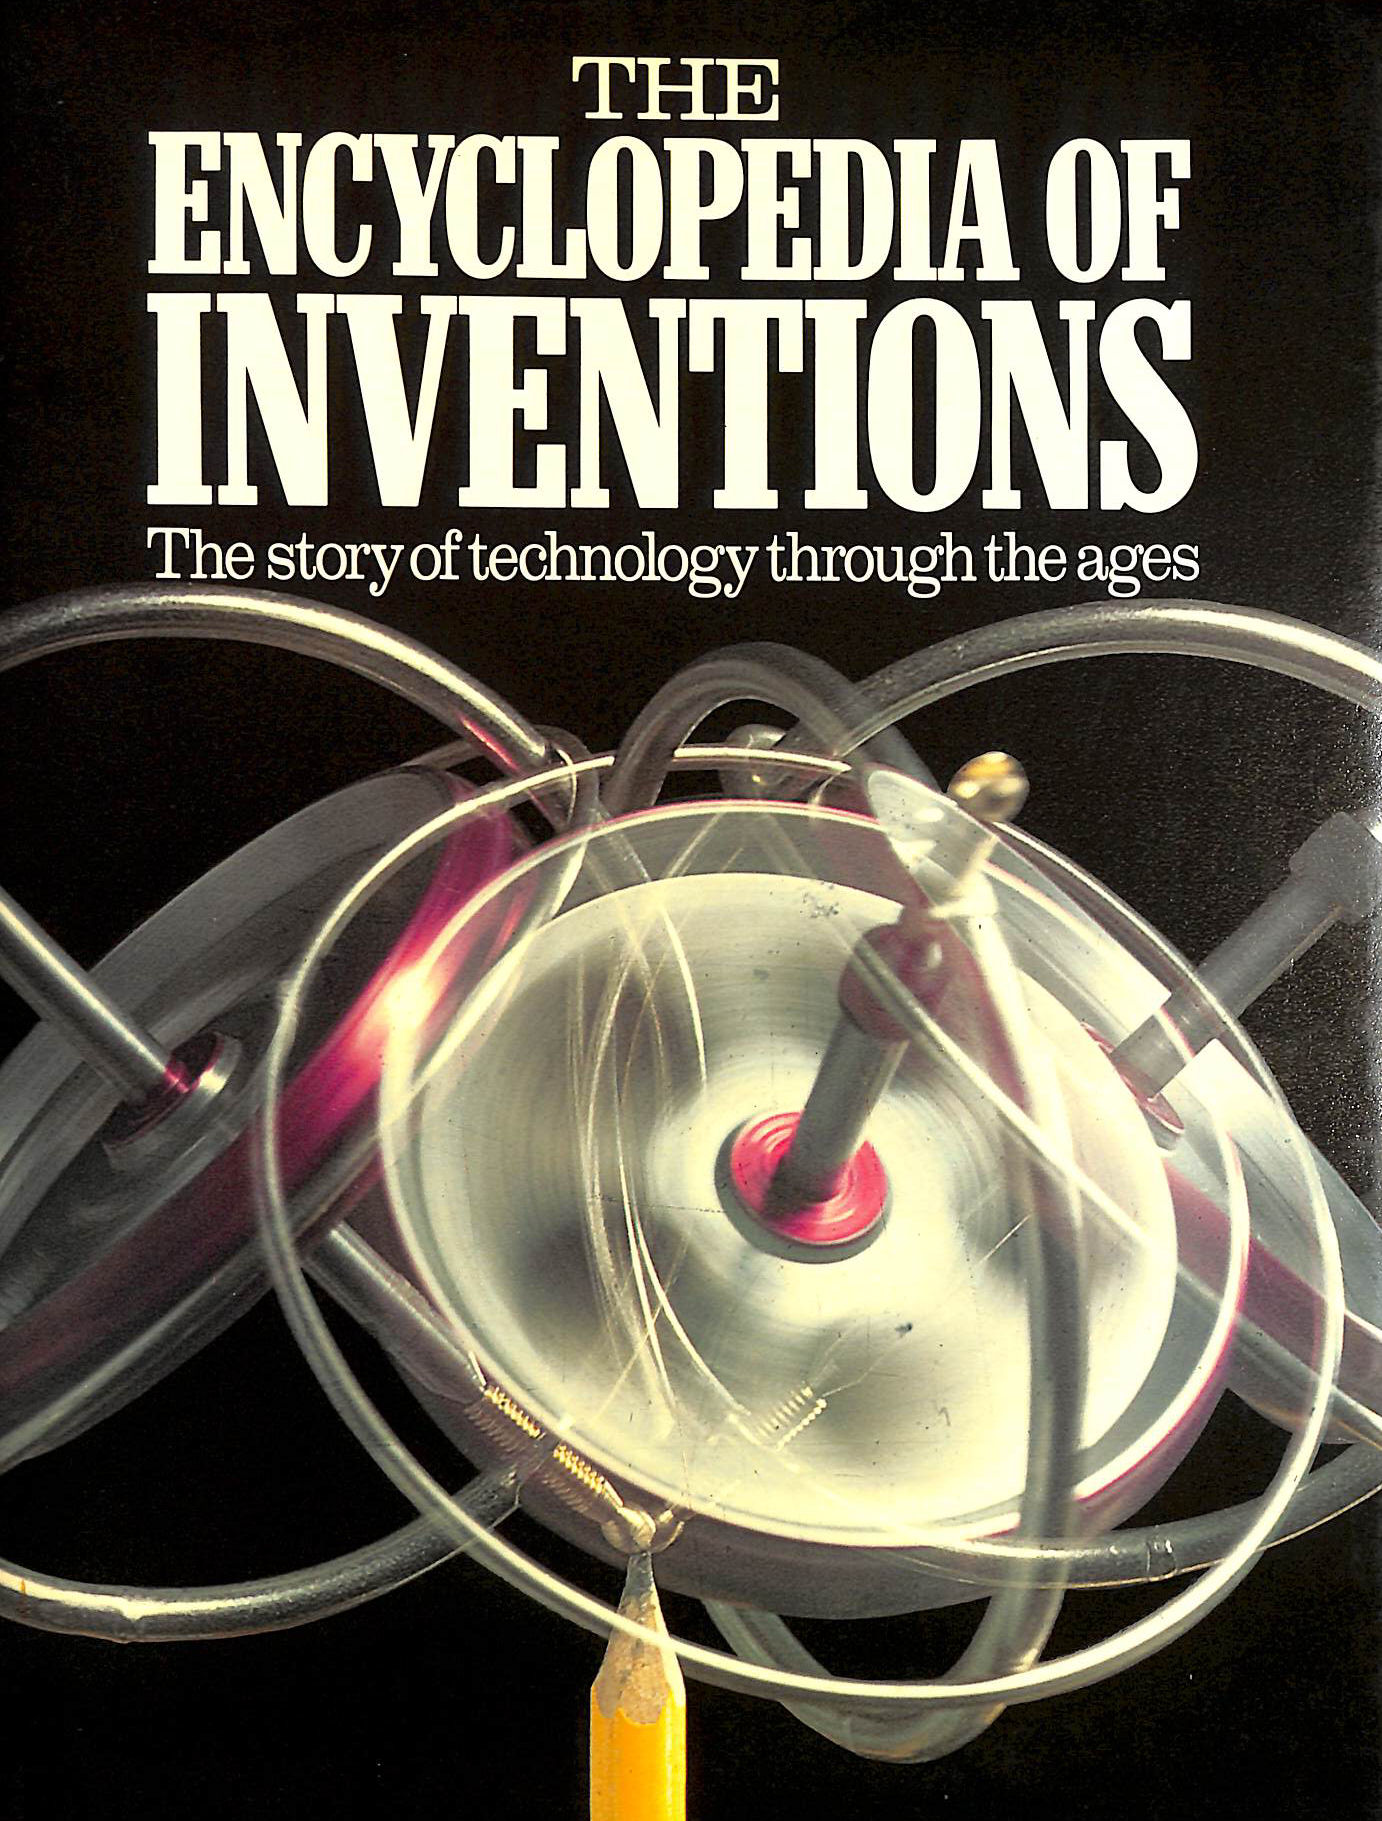 CLARKE, DONALD [EDITOR] - Encyclopaedia of Inventions